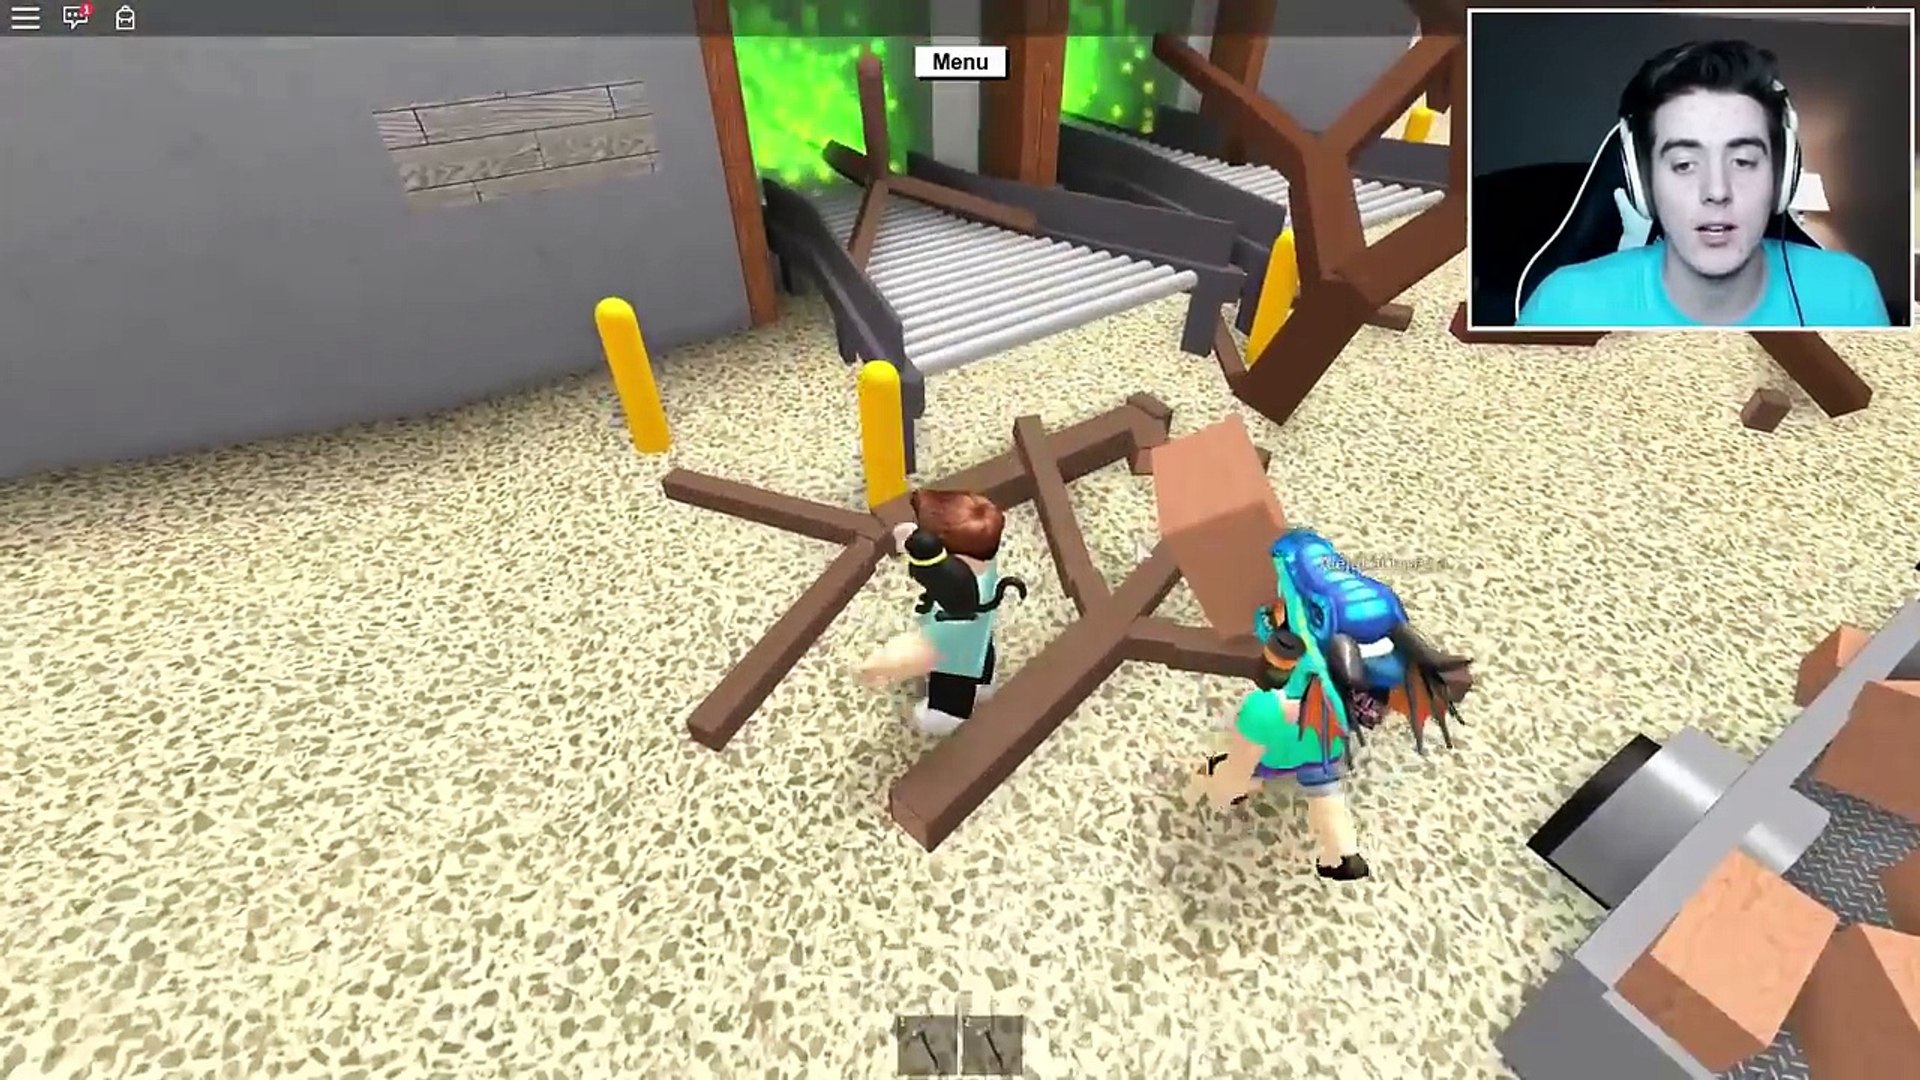 Realistic Roblox Escaping Roblox Prison In Real Life Pt 2 Roblox Irl Prison Escape W A Video Dailymotion - denis daily roblox escape the evil restaurant obby escaping the